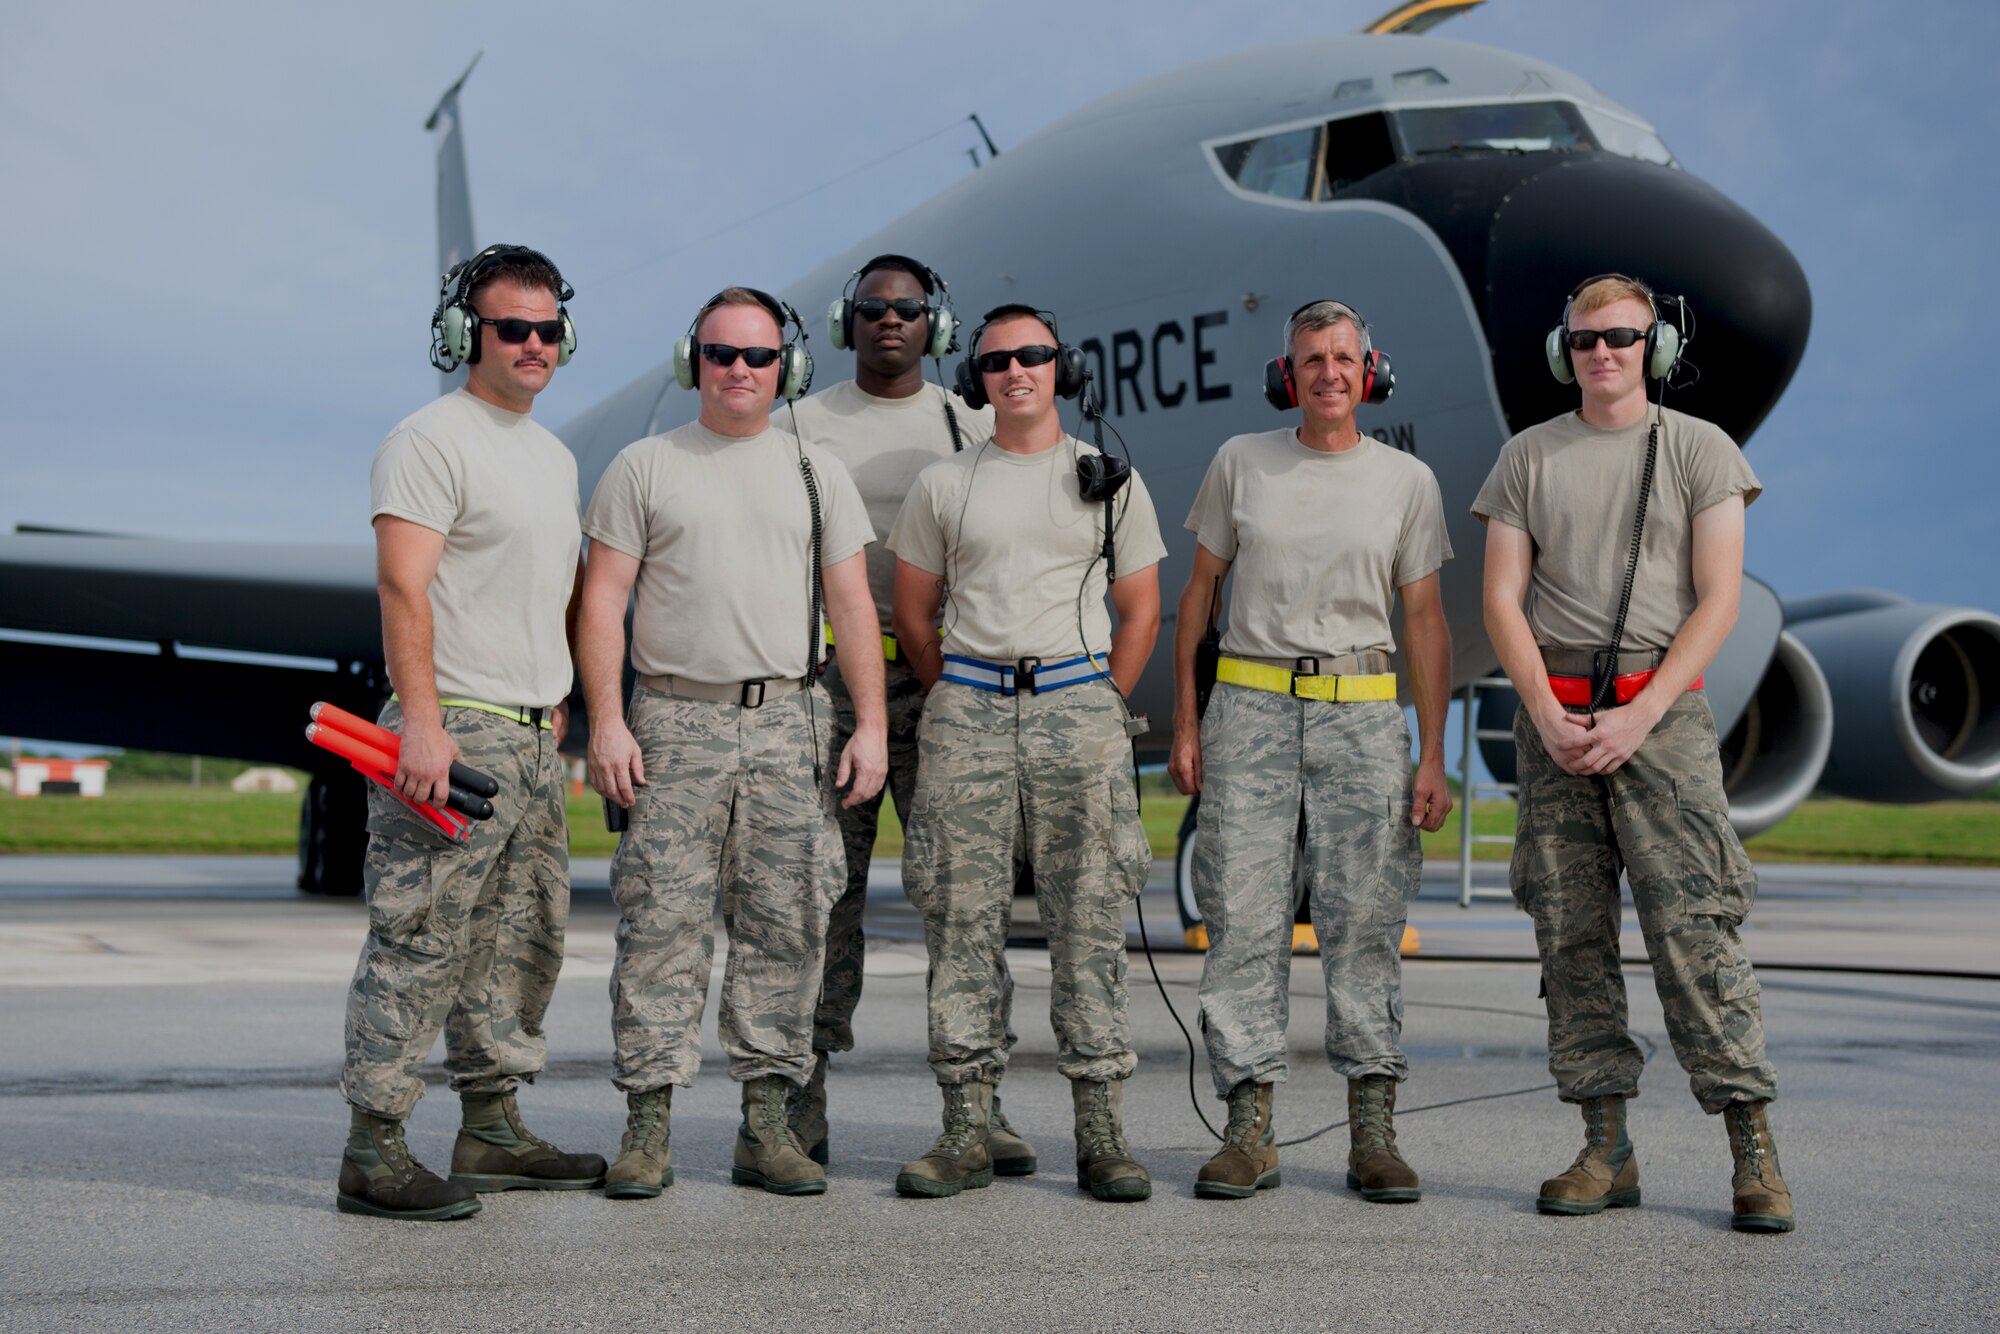 U.S. Air Force airmen deployed to the 506th Expeditionary Air Refueling Squadron, Guam, from the 157th Air Refueling Wing, N.H. and the 186th Air Refueling Wing, M.S. pose for a group photo in-front of a KC-135. The airmen had just completed preflight inspections on the KC-135 Stratotanker, which is deployed from the 157 ARW. (U.S. Air National Guard photo by Senior Airman Kayla McWalter/RELEASED)